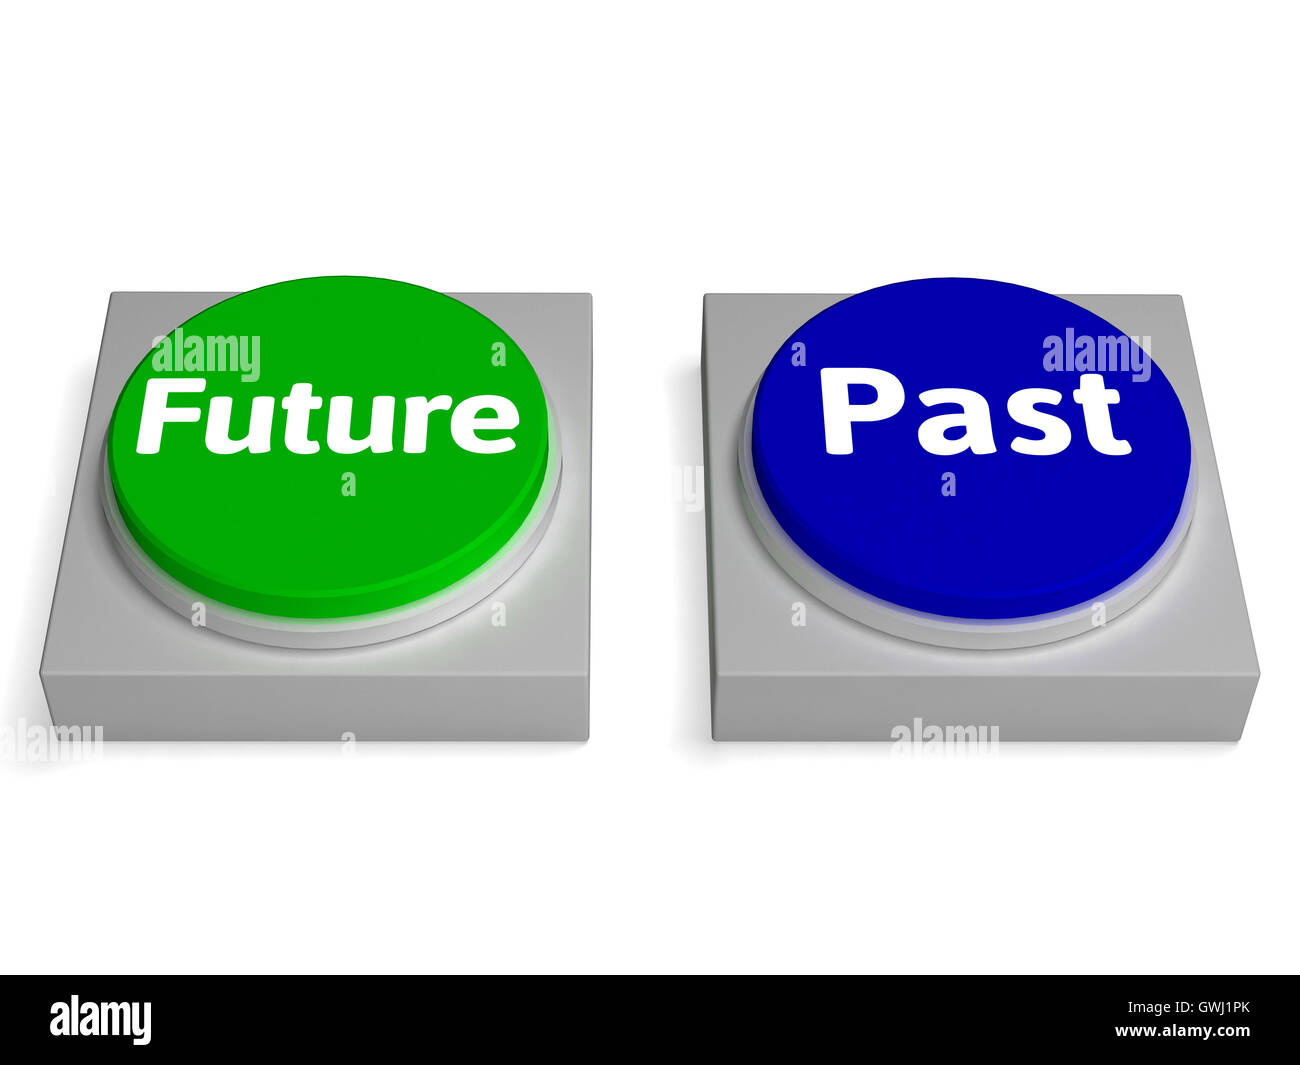 Future Past Buttons Shows Destiny Or History Stock Photo